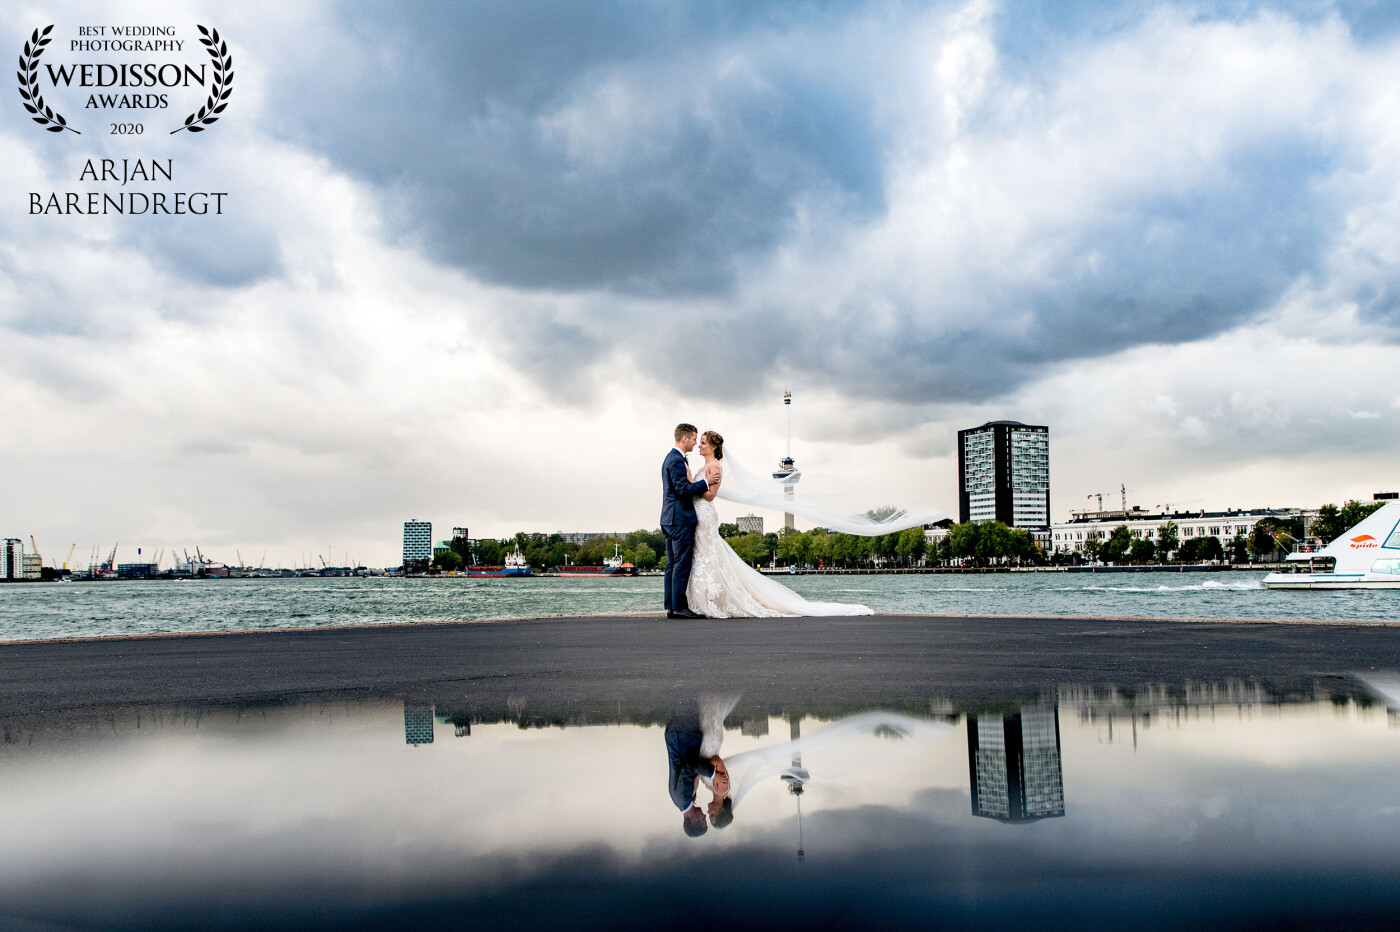 This lovely couple married in Rotterdam.: one of the biggest cities in the Netherlands. And they wanted to capture the skyline on their wedding pictures. And we succeeded... Left we see the cranes of Rotterdam Harbor, at the right Rotterdam Spido, and in the center De Euromast (Euromast Tower). <br />
This is really Rotterdam! 